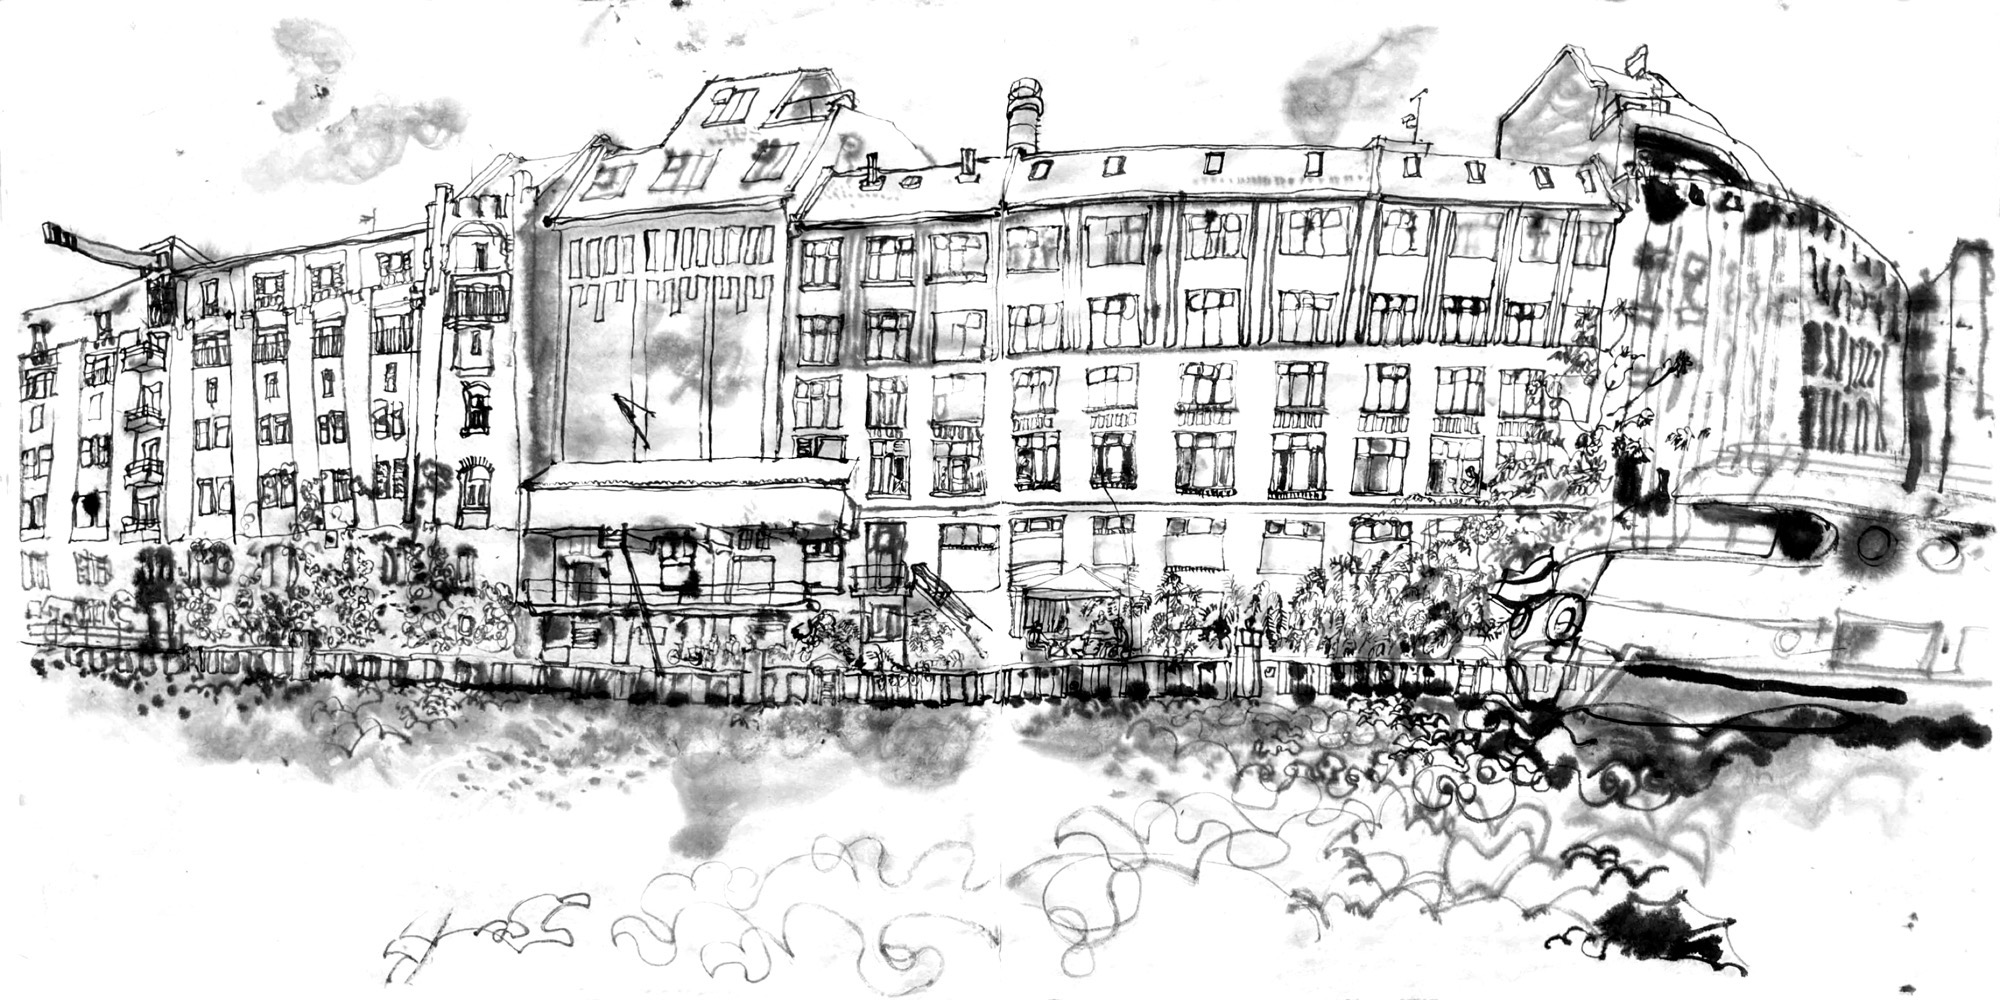 Ink drawing of an 19th century industrial building on a riverbank. On the bank is a little pavillion with for musicians playing. A ship is leaving the image to the right.